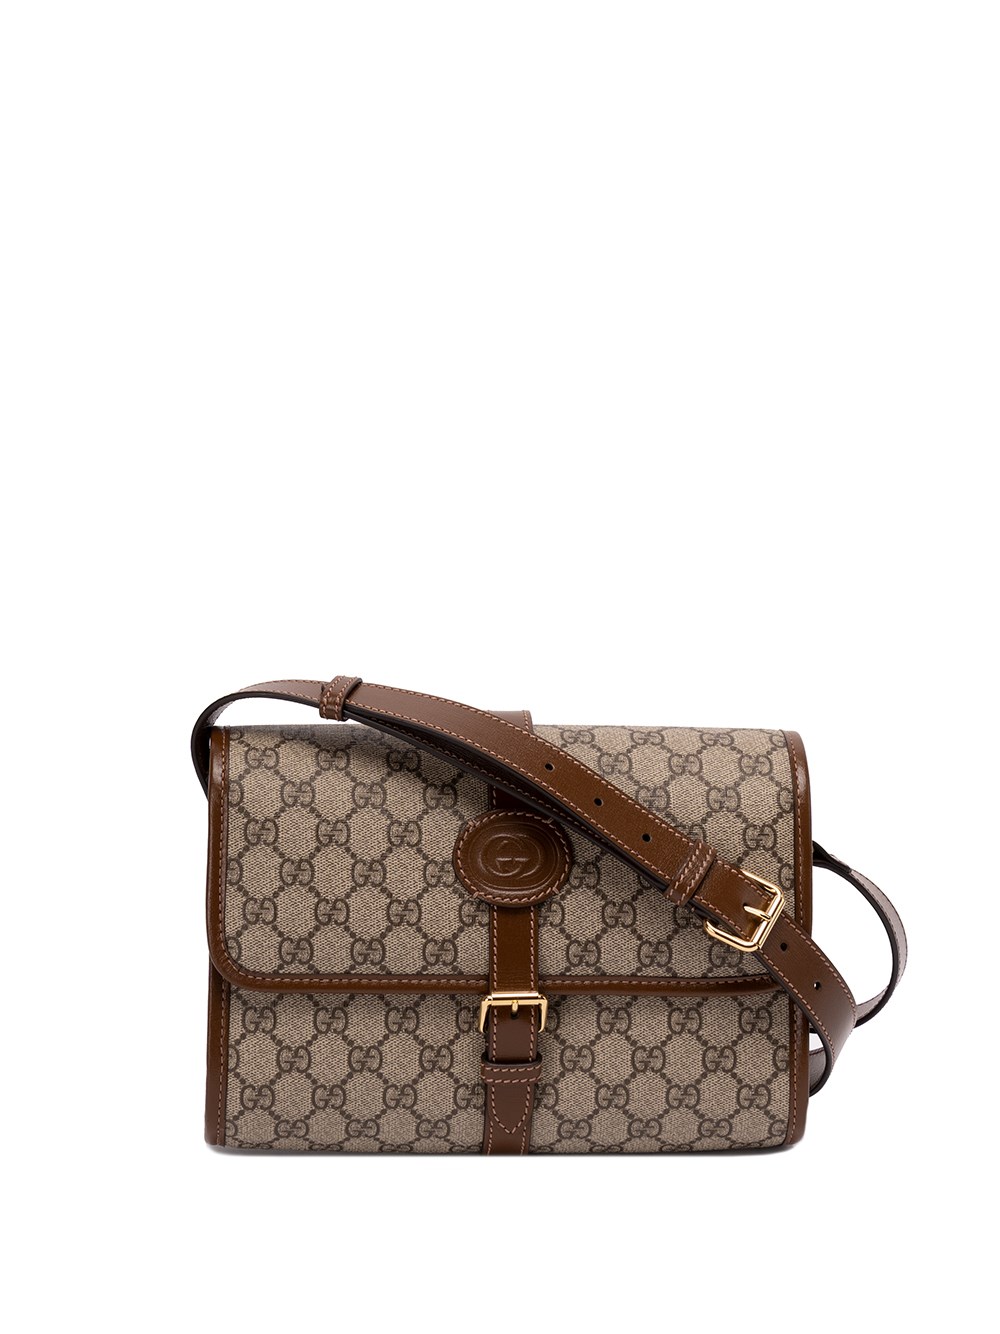 Gucci Brown/Beige GG Supreme Canvas and Leather Web Detail Messenger Bag  Gucci